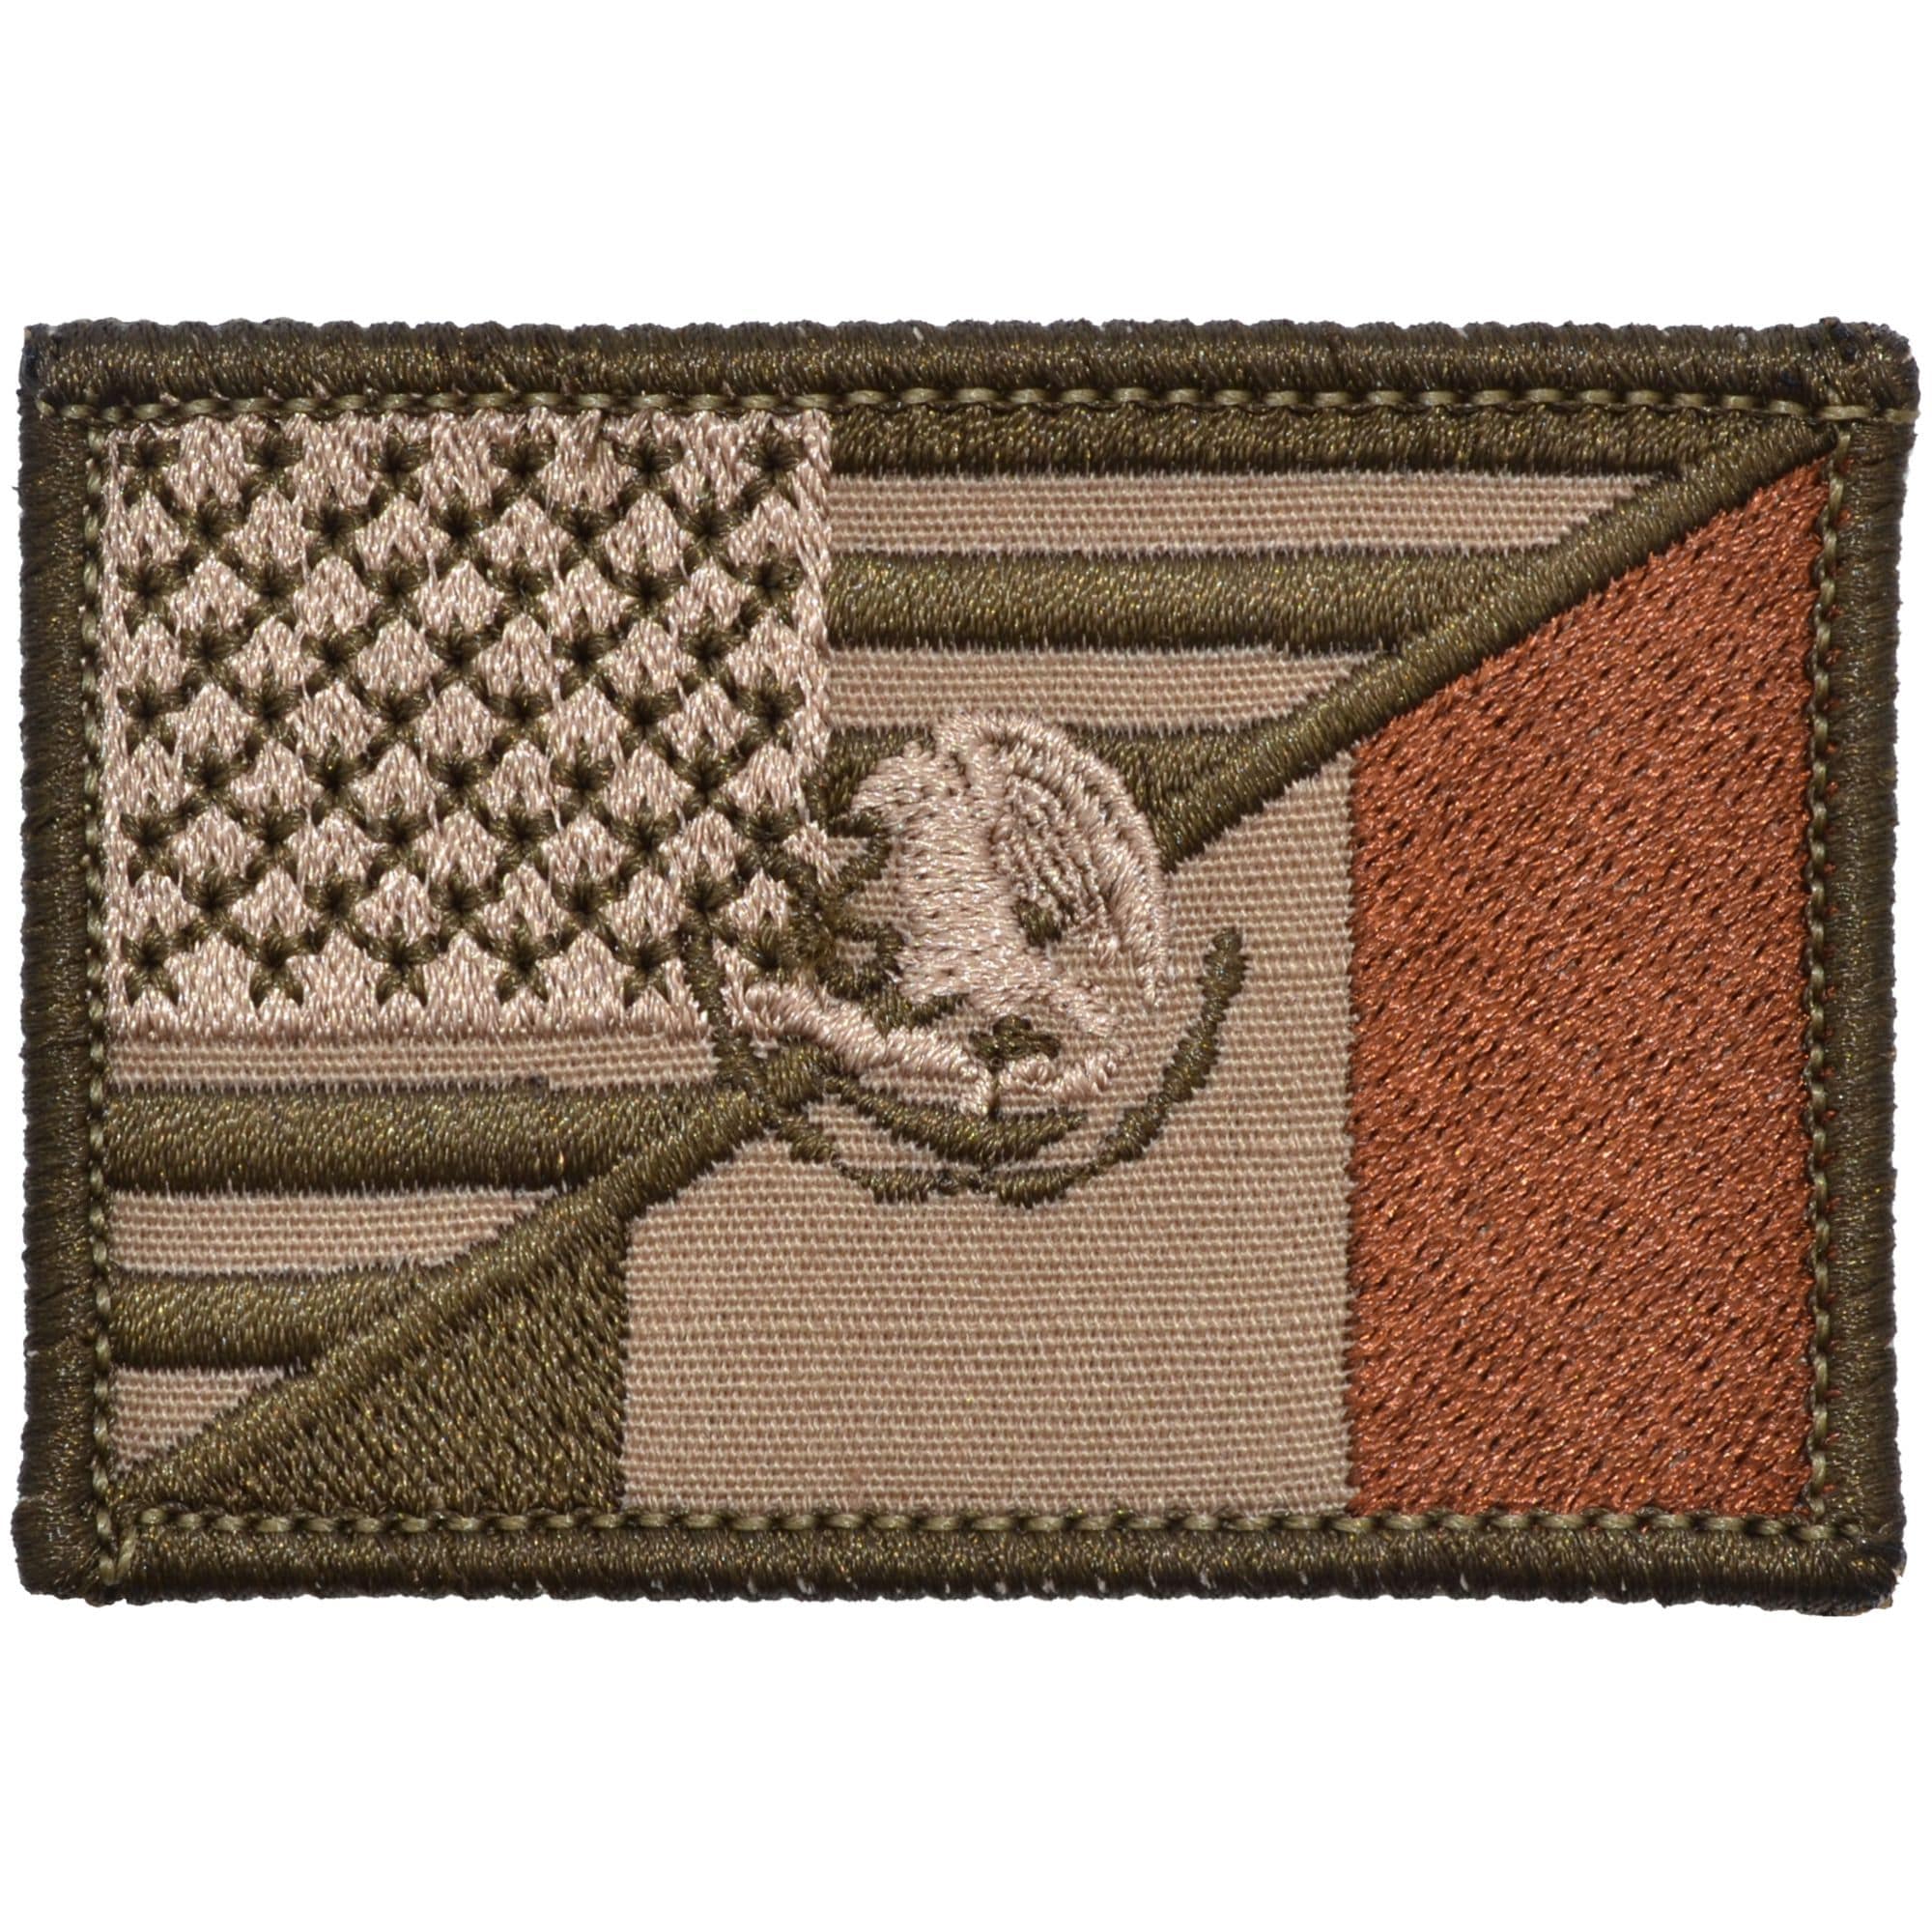 Mexico Flag Embroidered Patch Mexican Military Tactical Morale